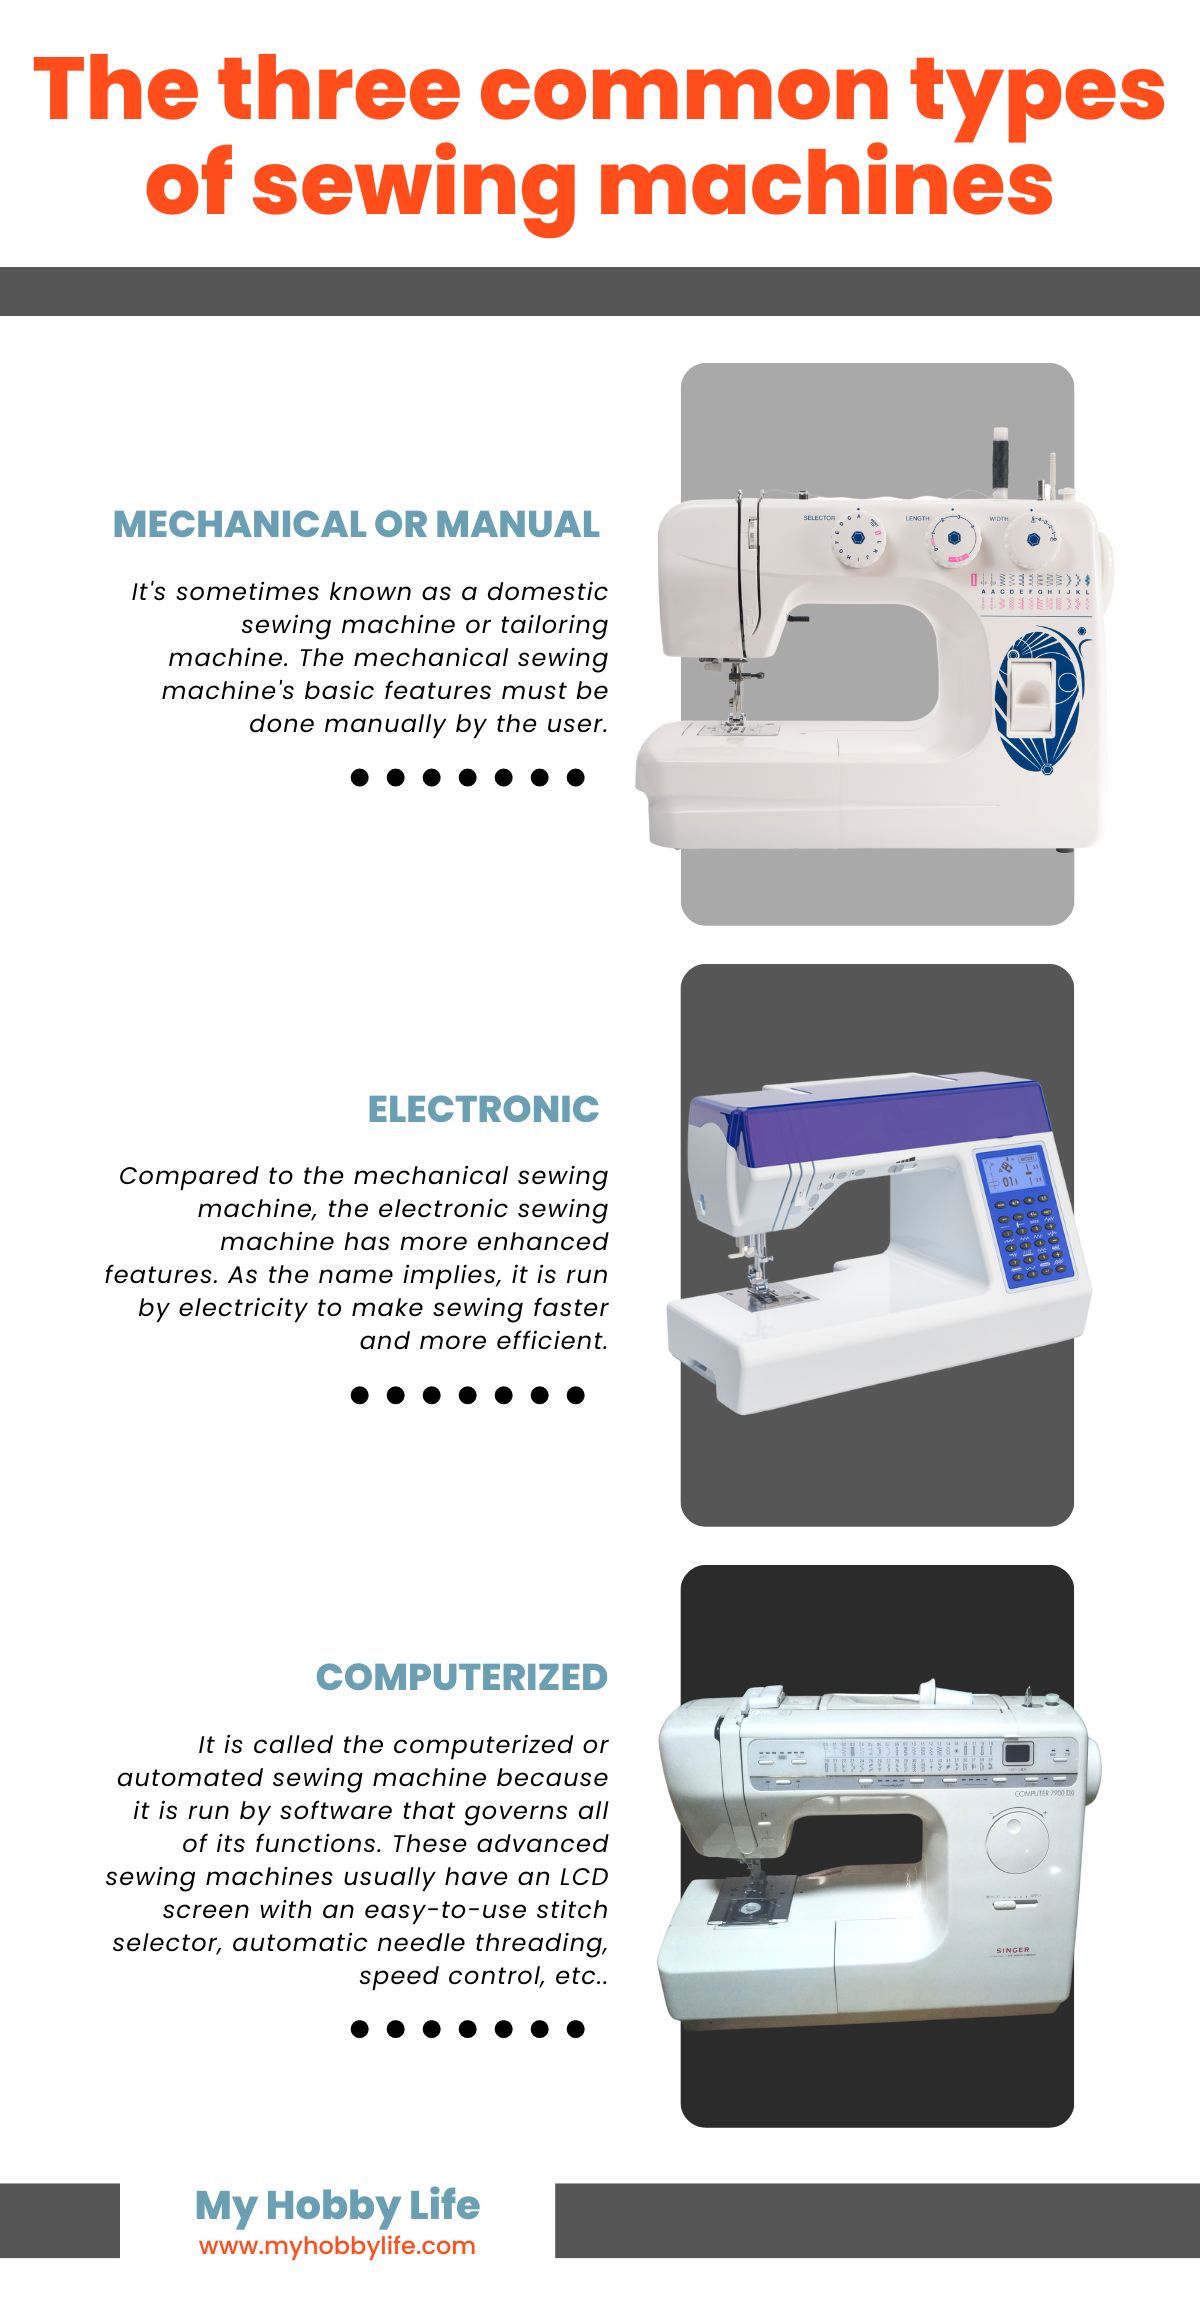 The three common types of sewing machines